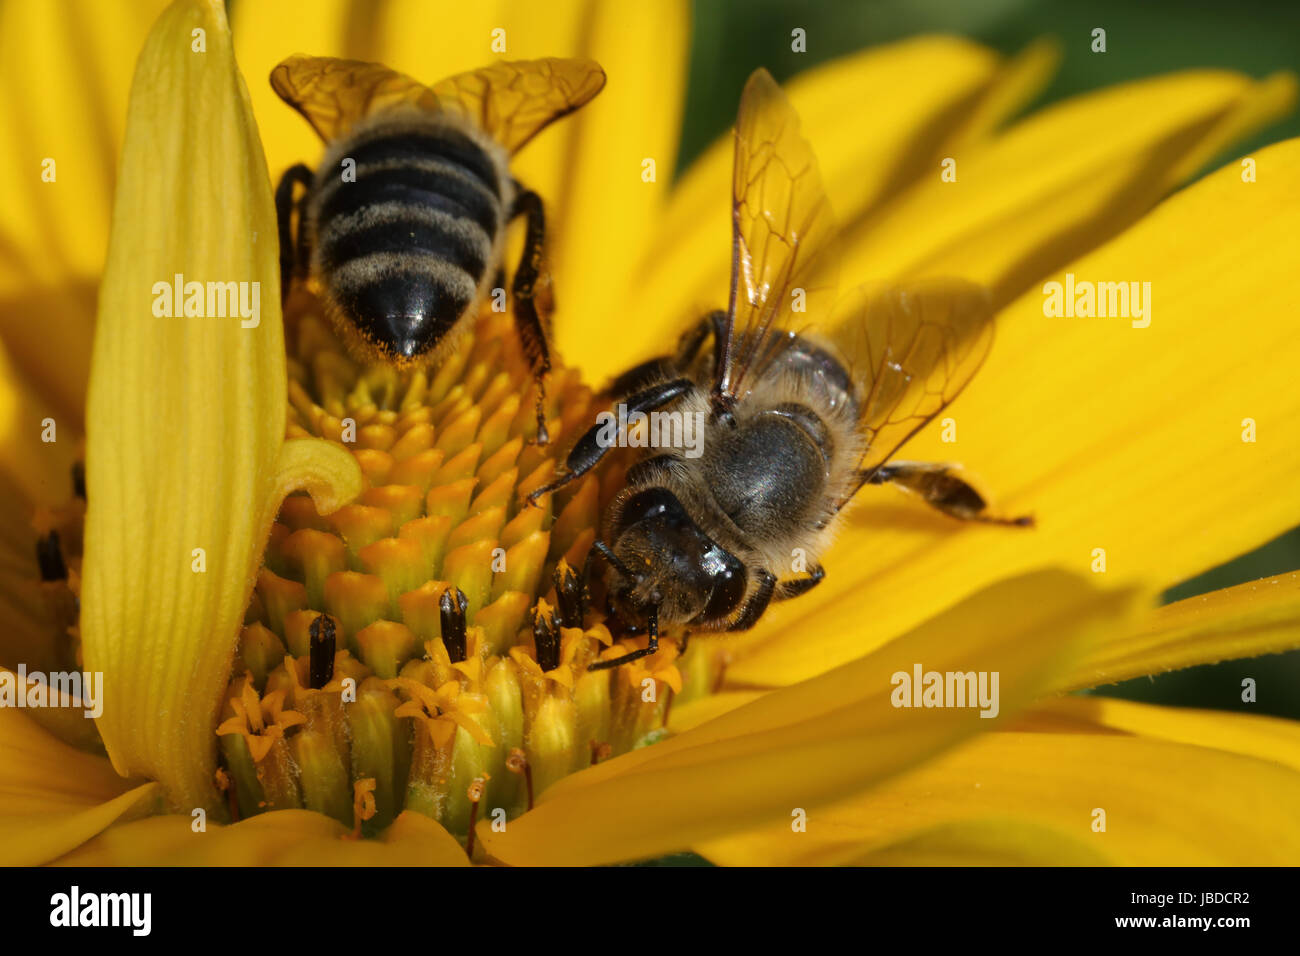 Berlin, Germany, bee collecting nectar on a sunflower Stock Photo